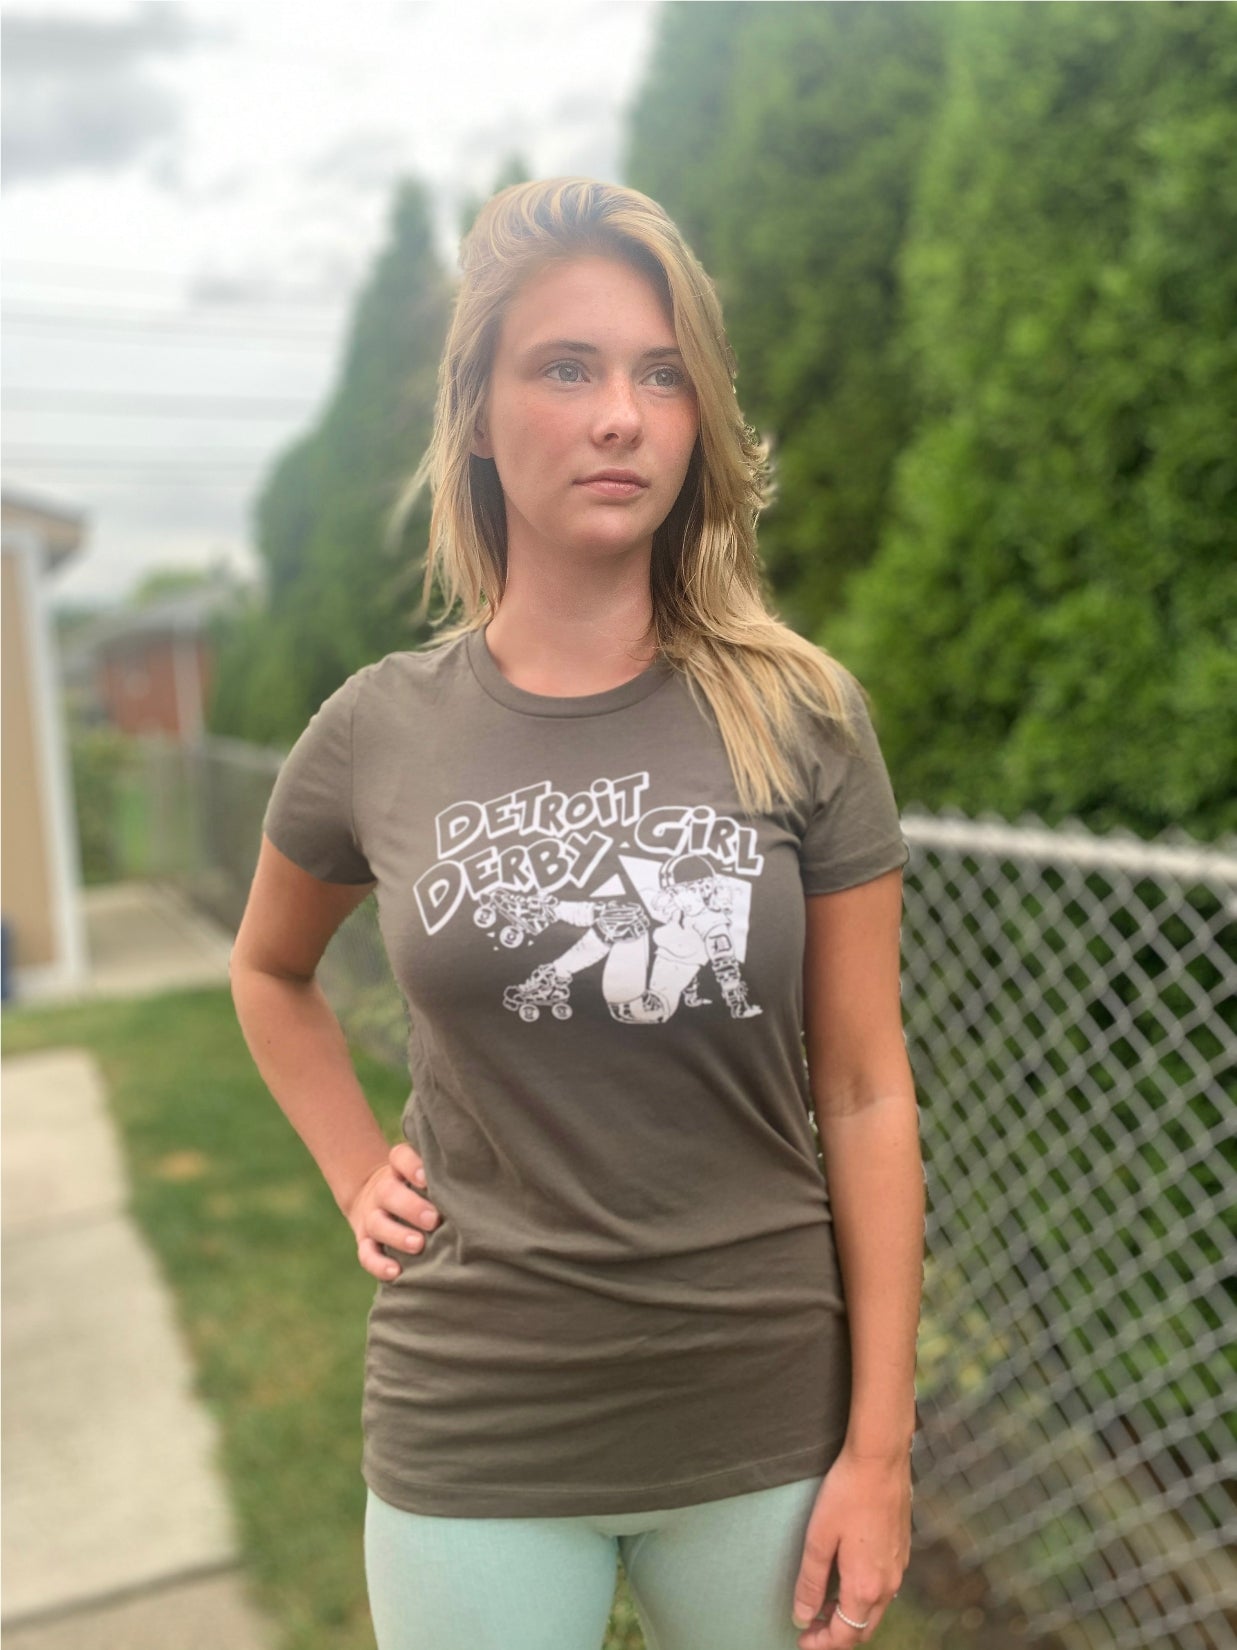 Derby Girls fitted T- Shirt